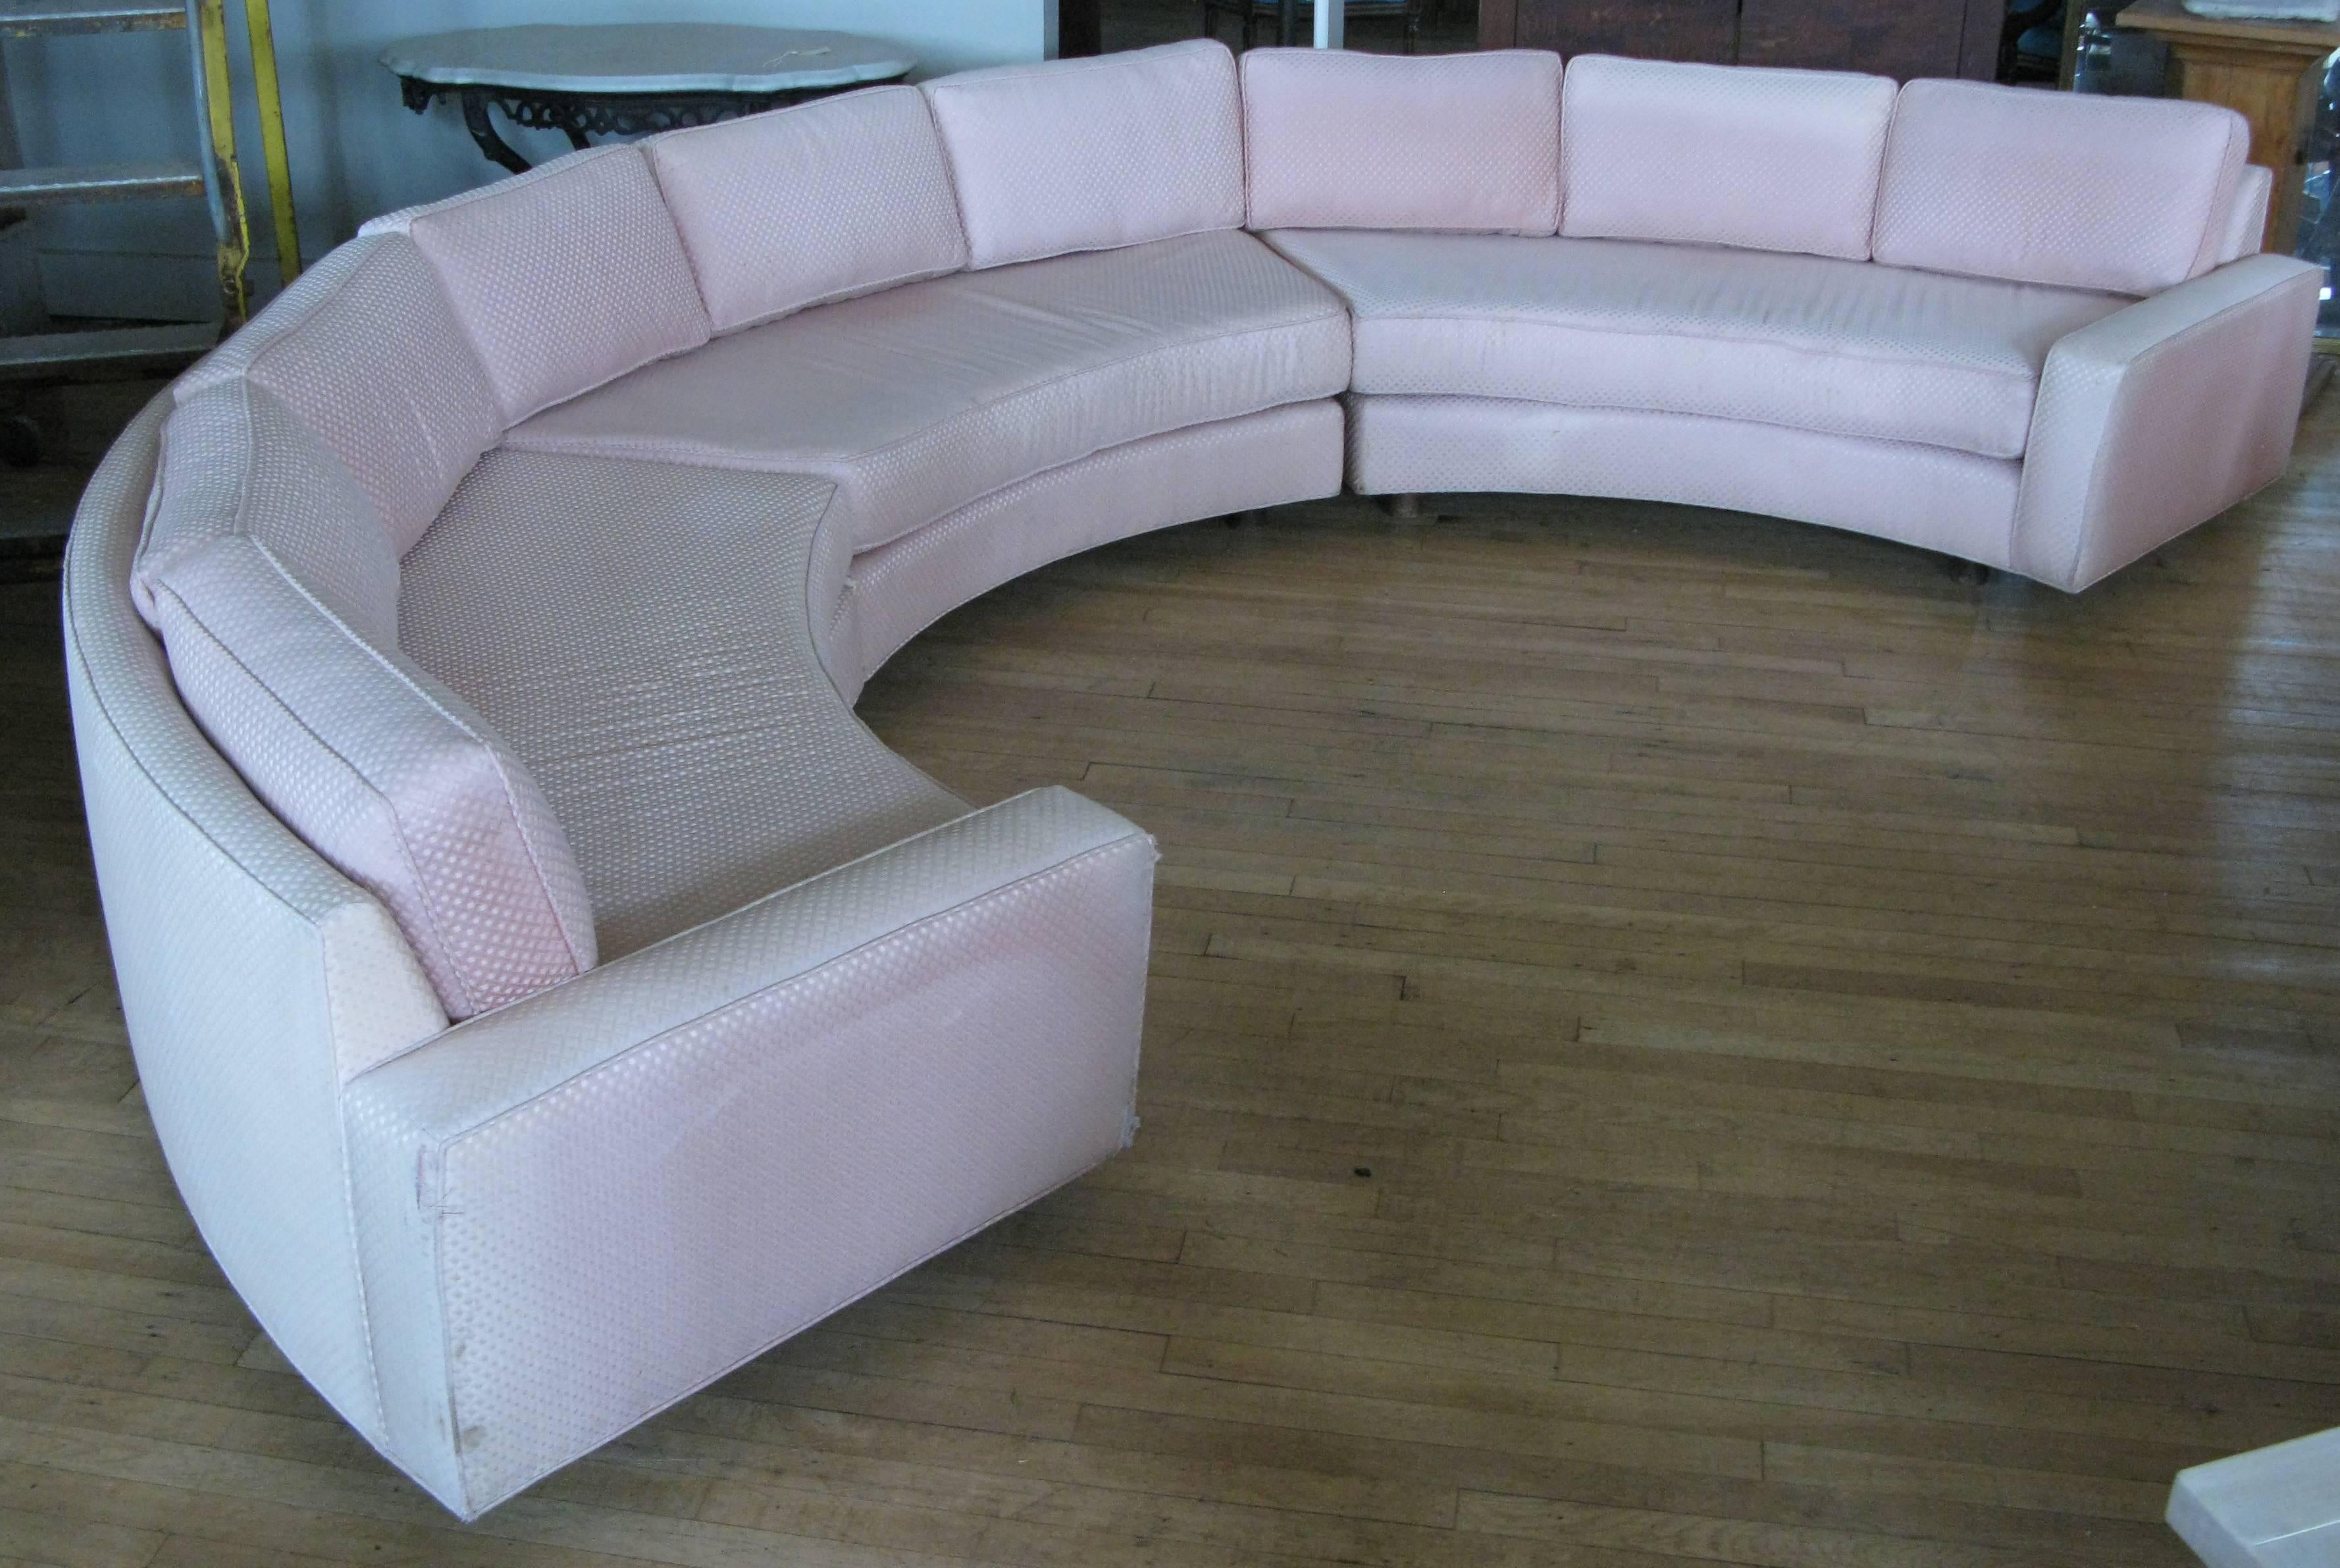 An outstanding large curved three-piece semi-circular sectional sofa designed by Milo Baughman, circa 1970. Fantastic shape and proportions make this a very comfortable sofa. Can be placed with all three sections together making a complete